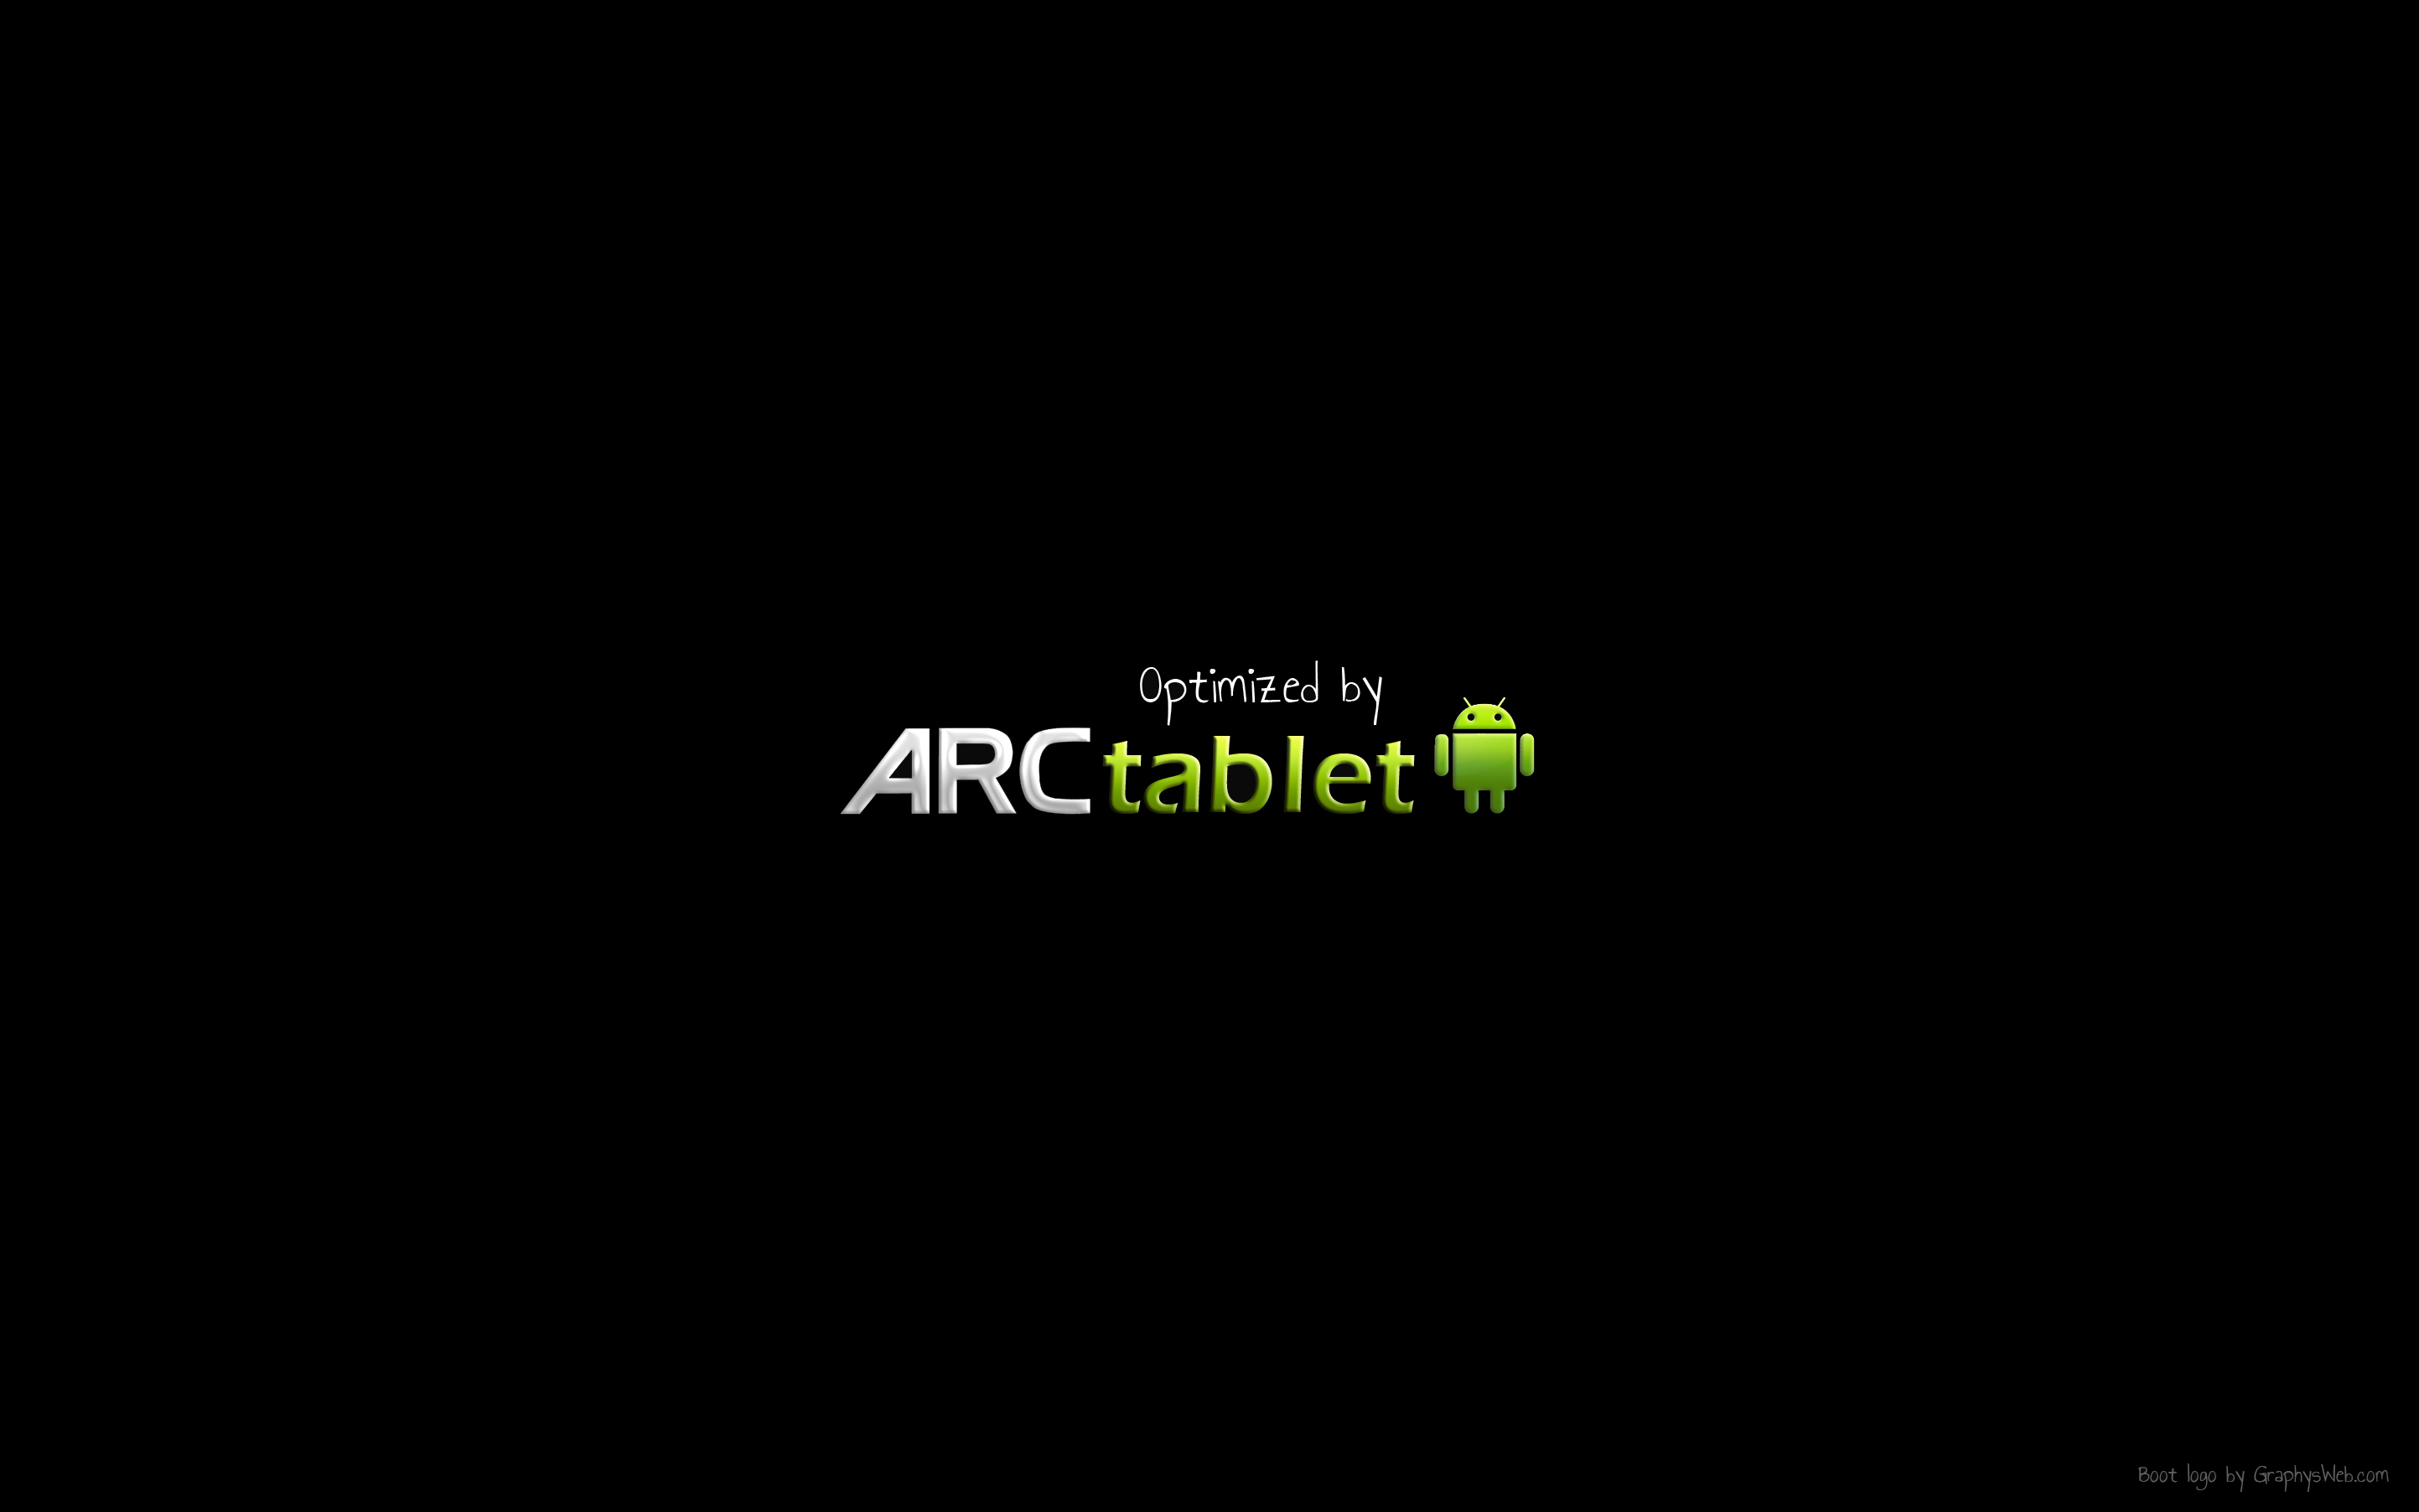 arctablet_boot_by_graphys.jpg